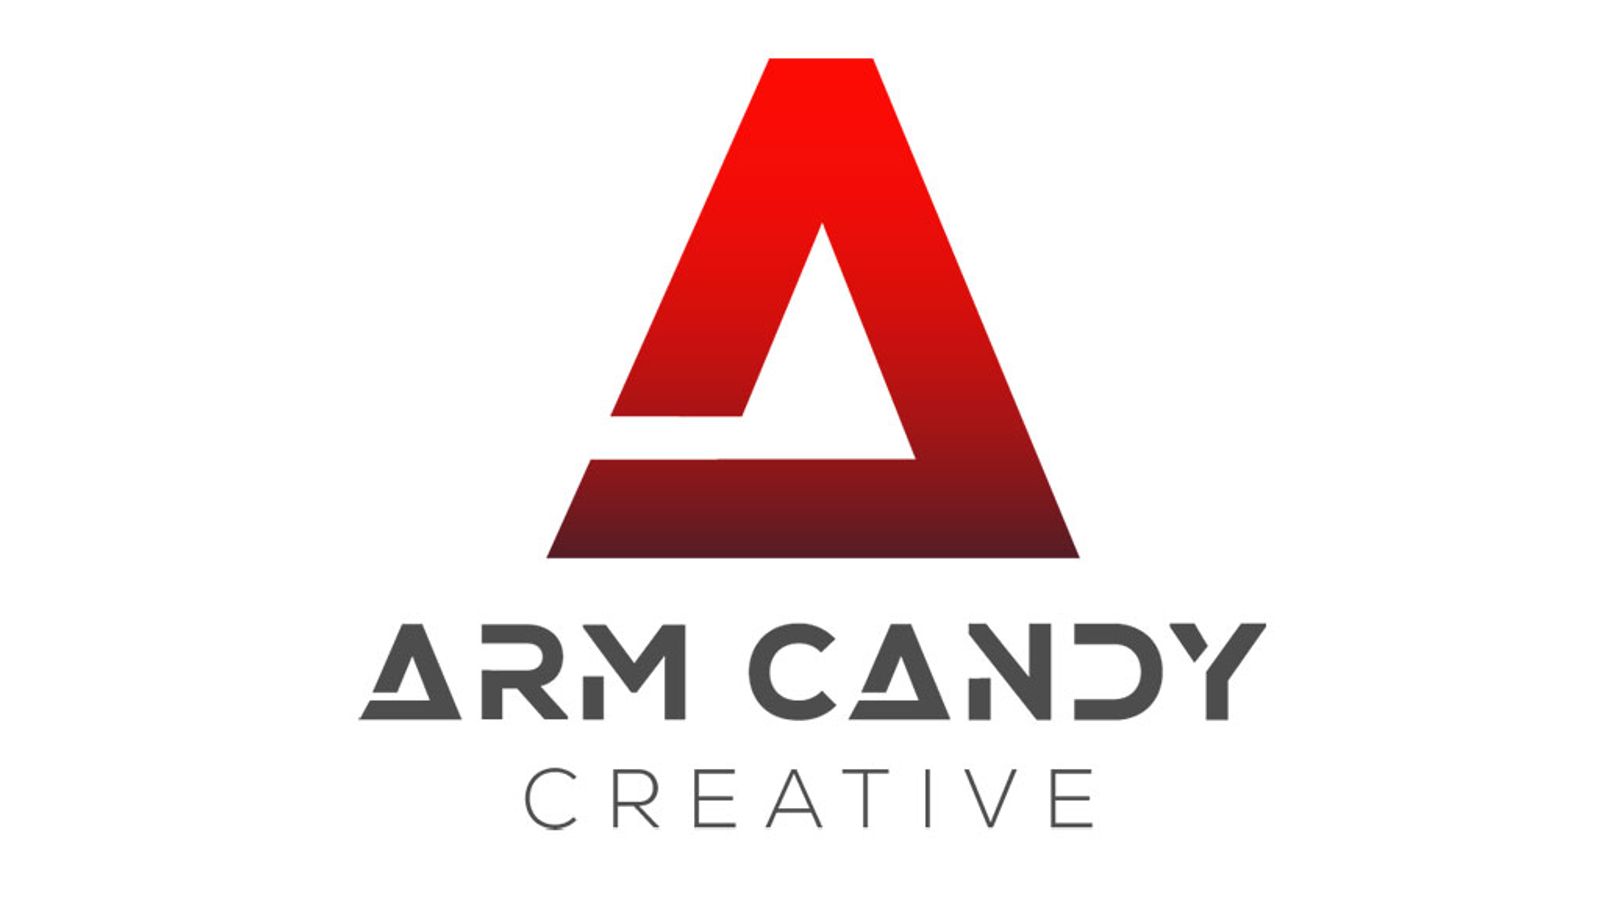 Arm Candy Creative Wants To Usher In A New Era Of Crossover Marketing